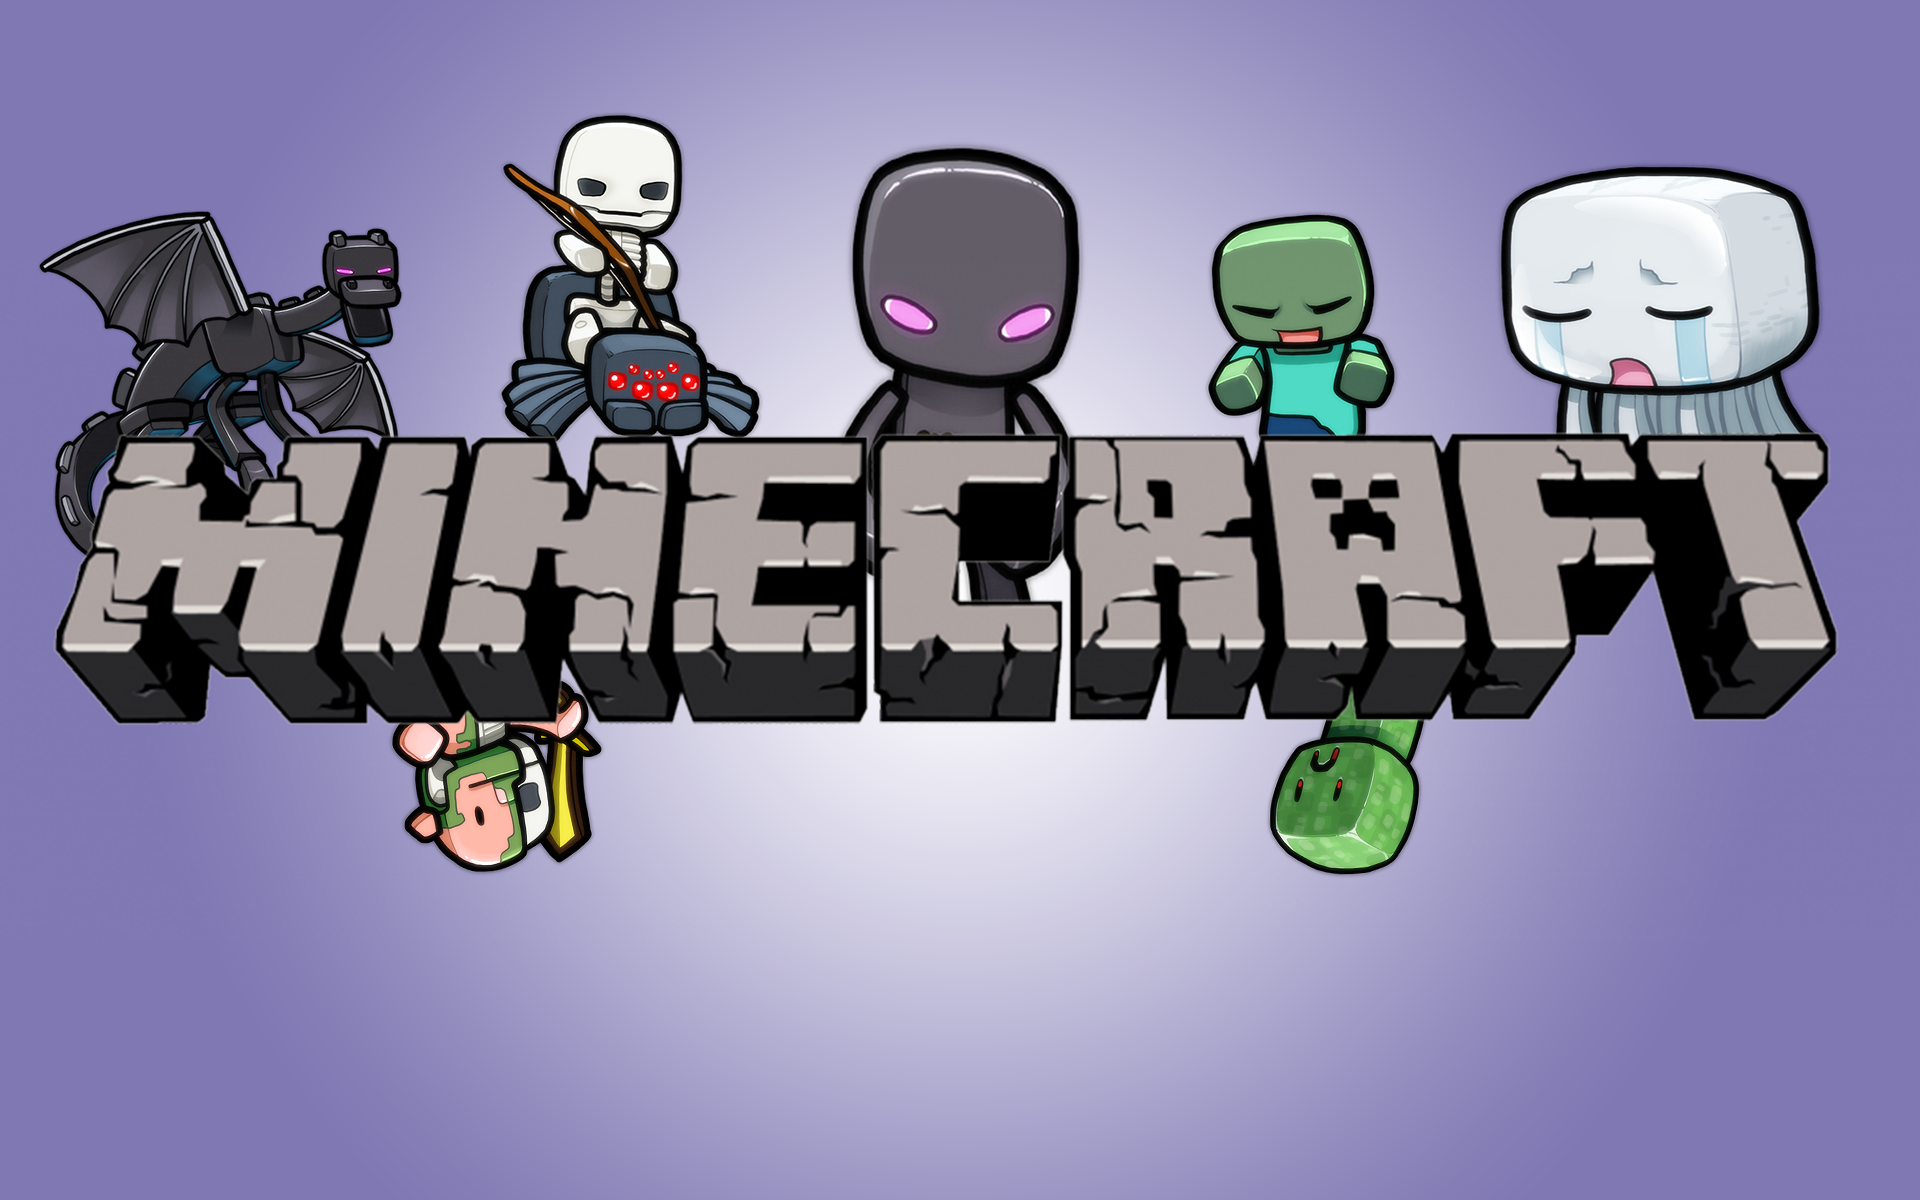 Minecraft Cartoon Wallpapers [15 colors] by Gamex101 on DeviantArt